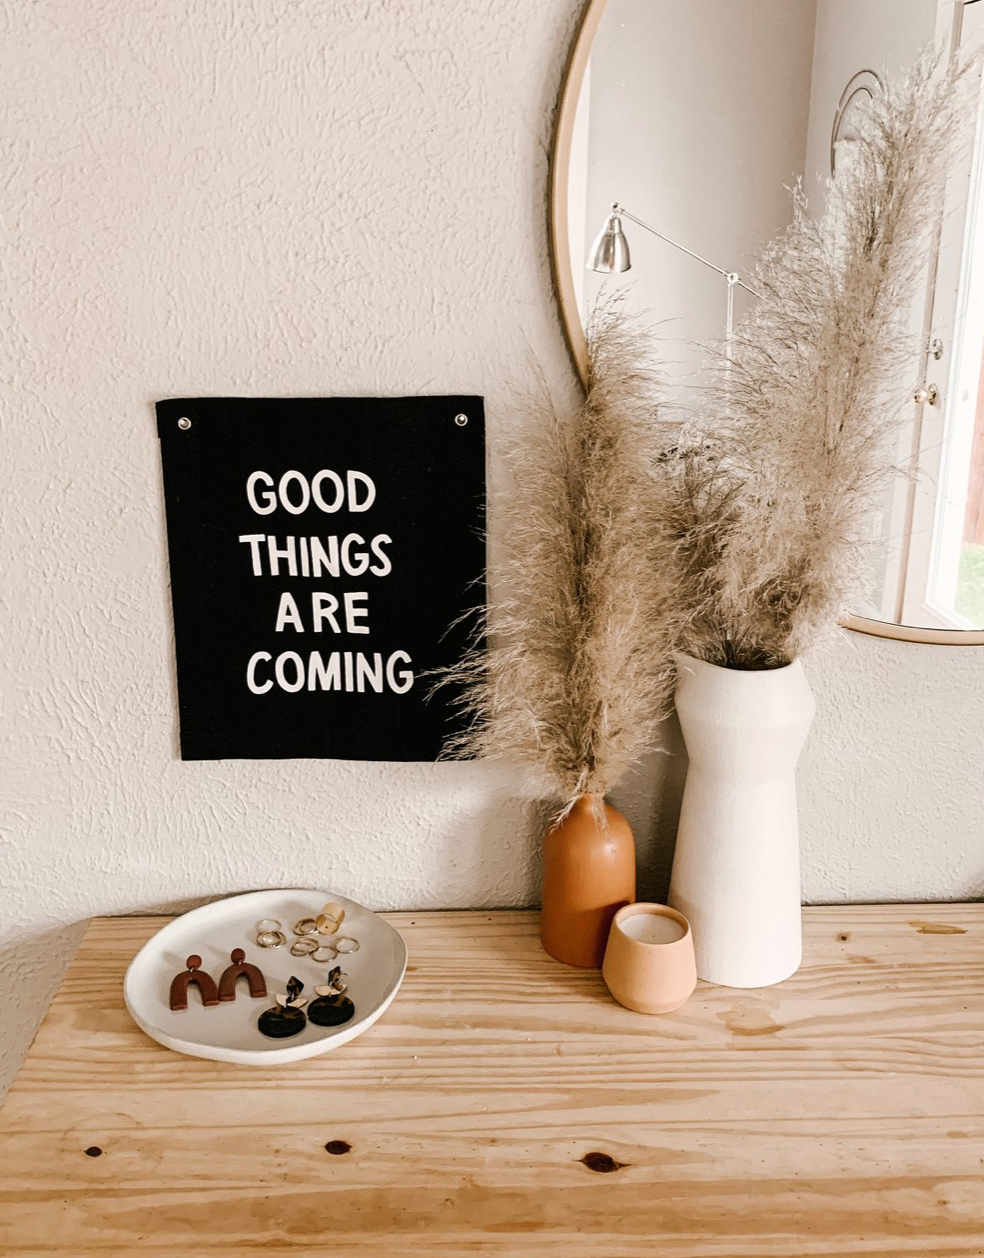 Good Things Banner - Clothe Boutique